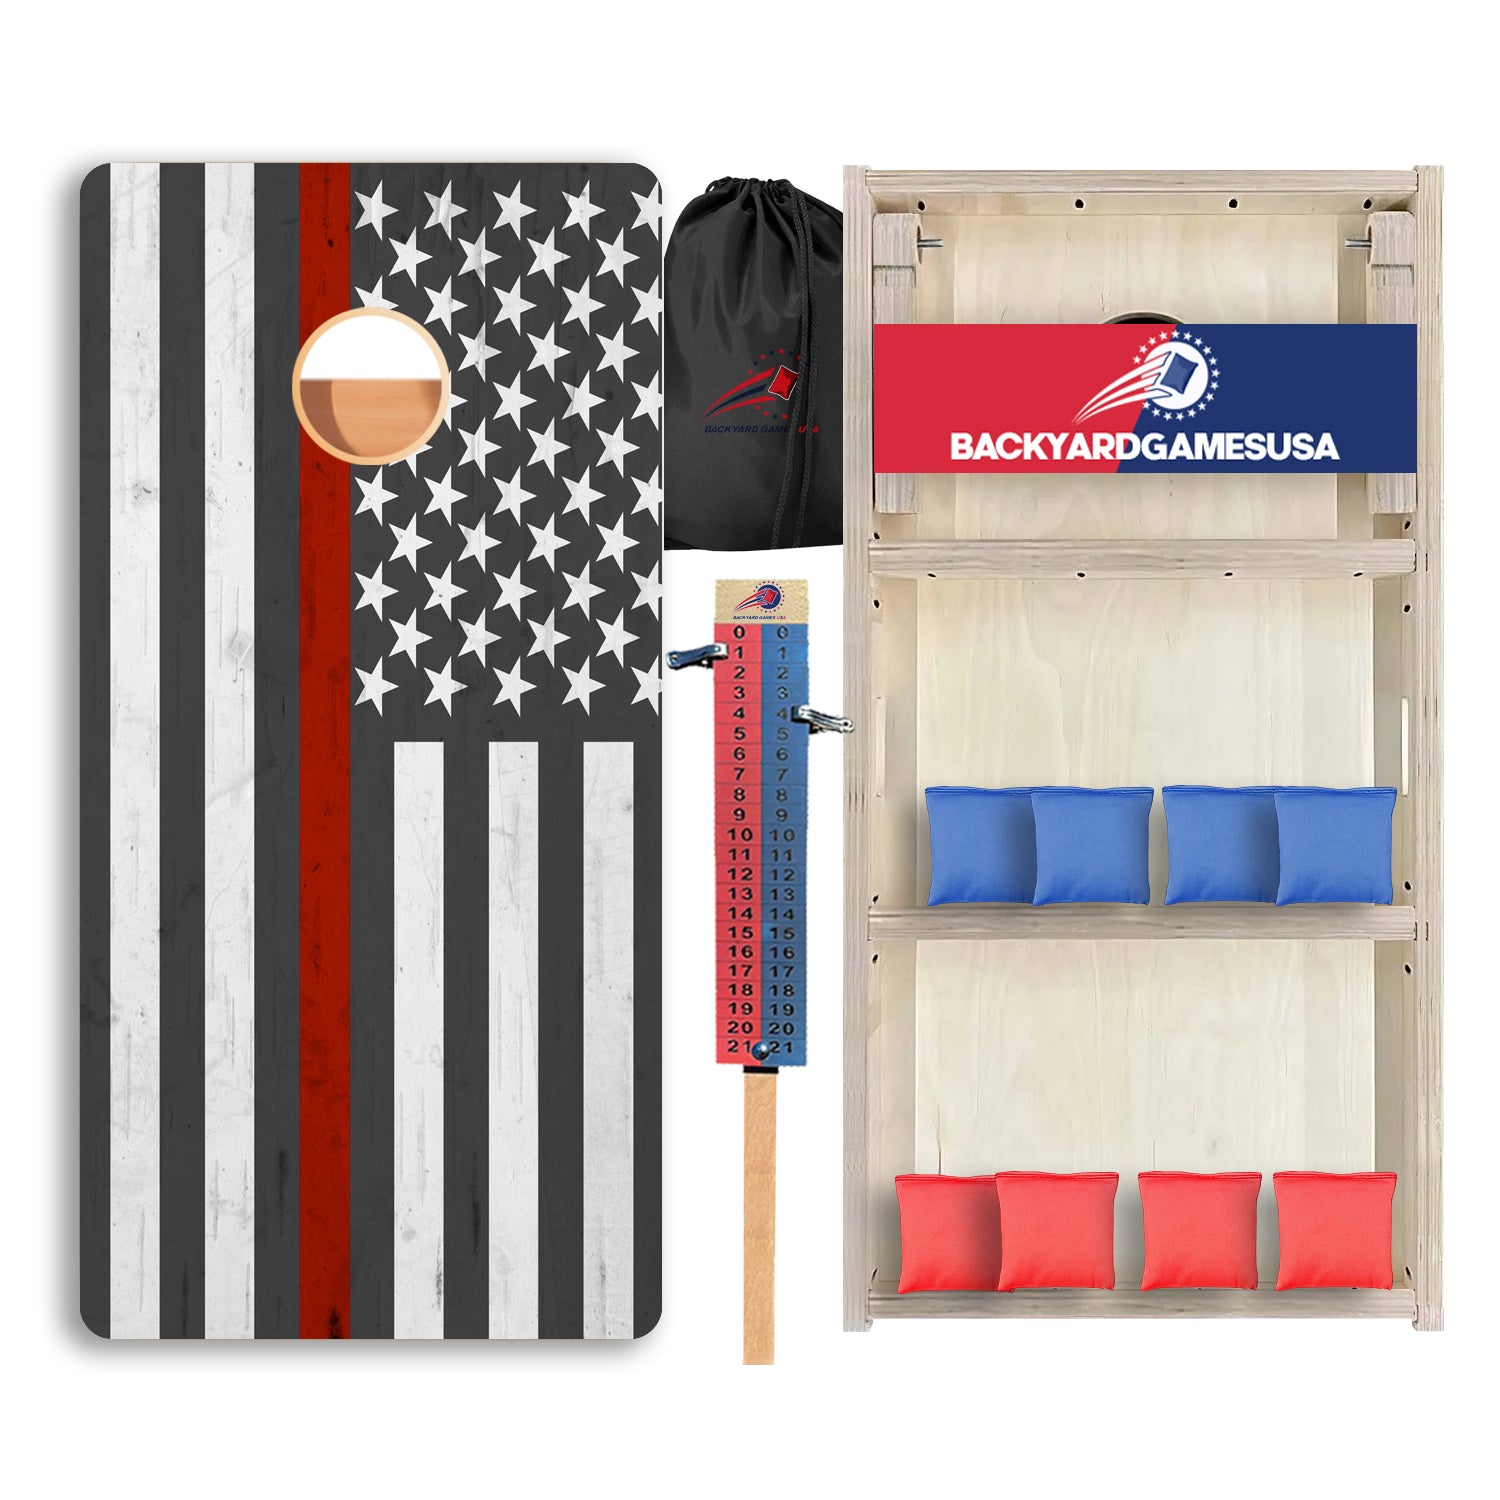 Red Line Clean Professional Cornhole Boards